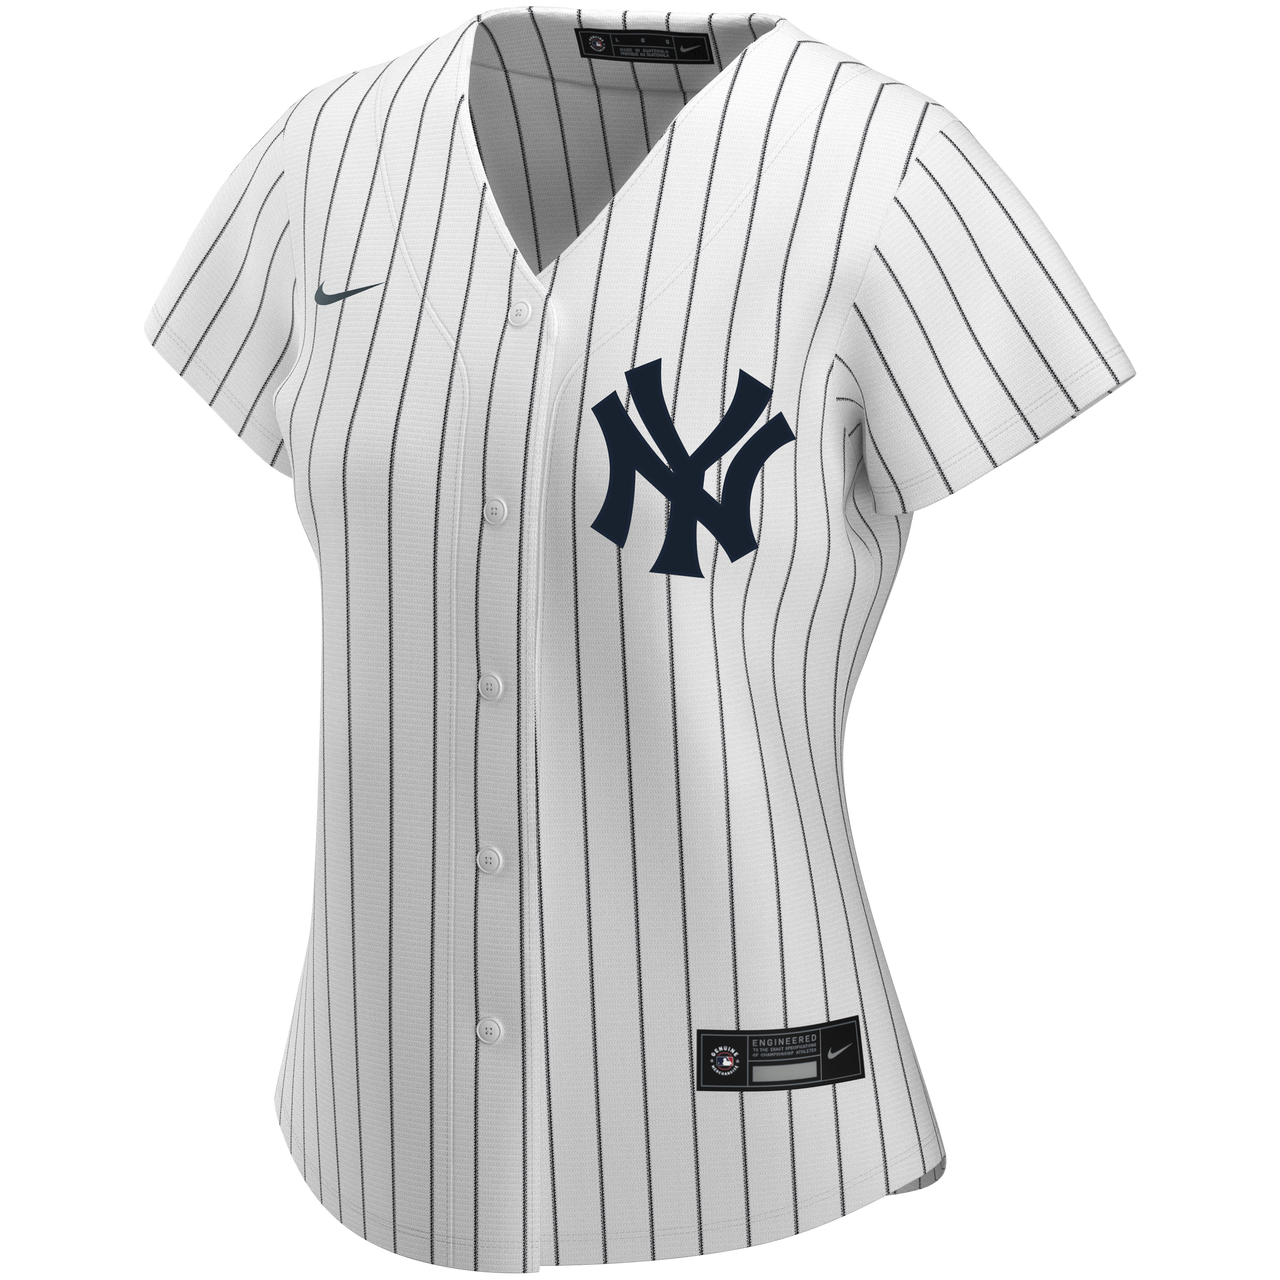 Lou Gehrig No Name Jersey - Yankees Replica Home Number Only